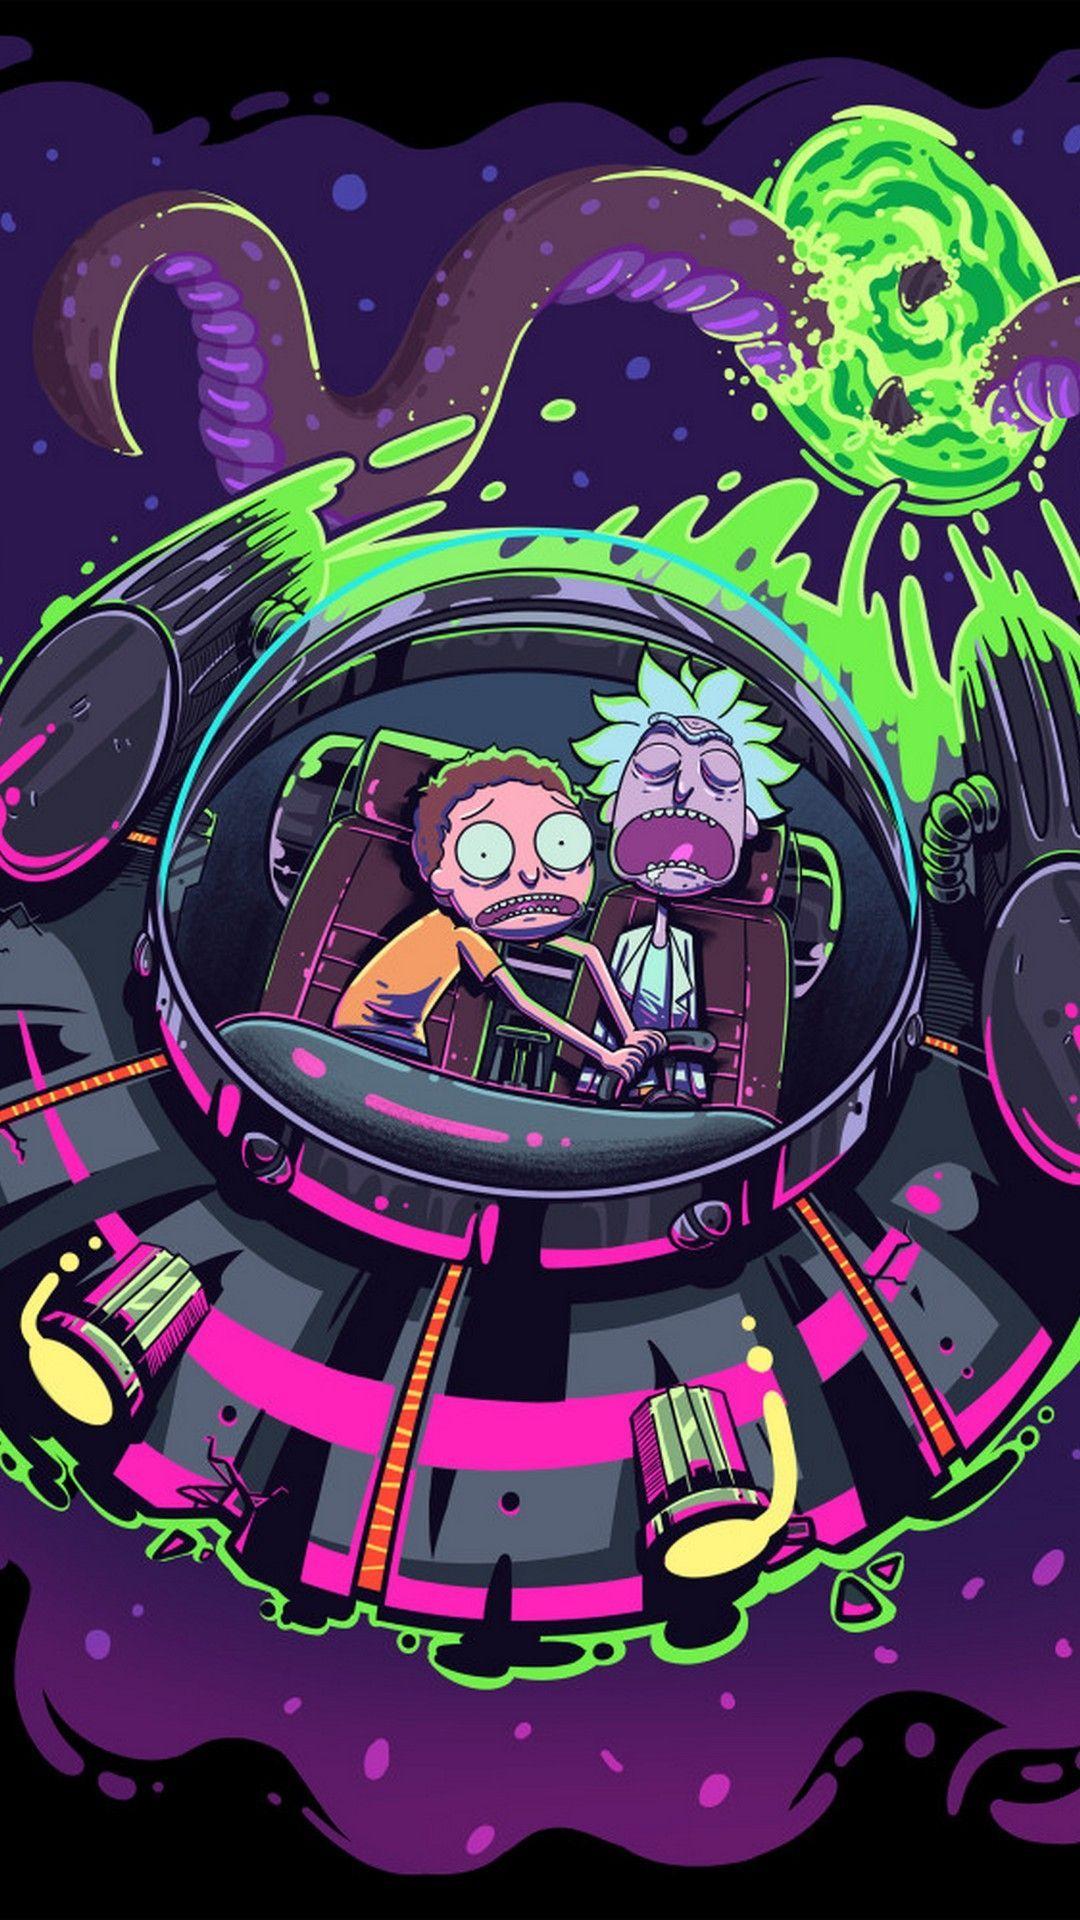 Rick and Morty Trippy Spaceship